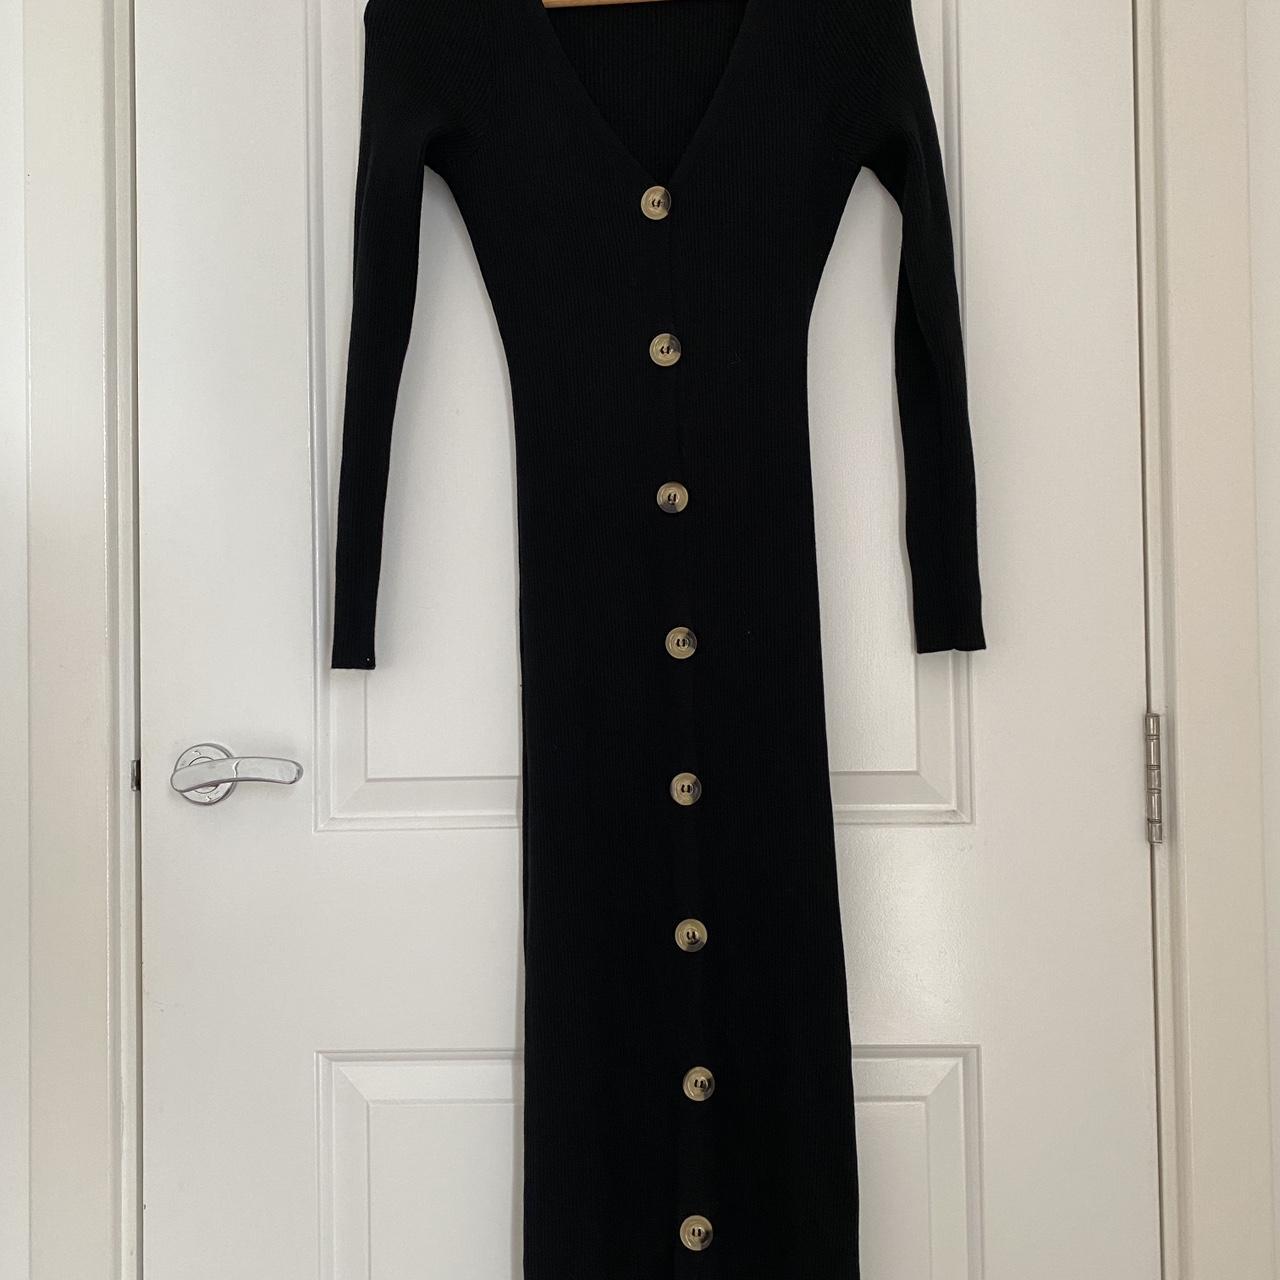 Missguided black ribbed midi dress button up - you... - Depop